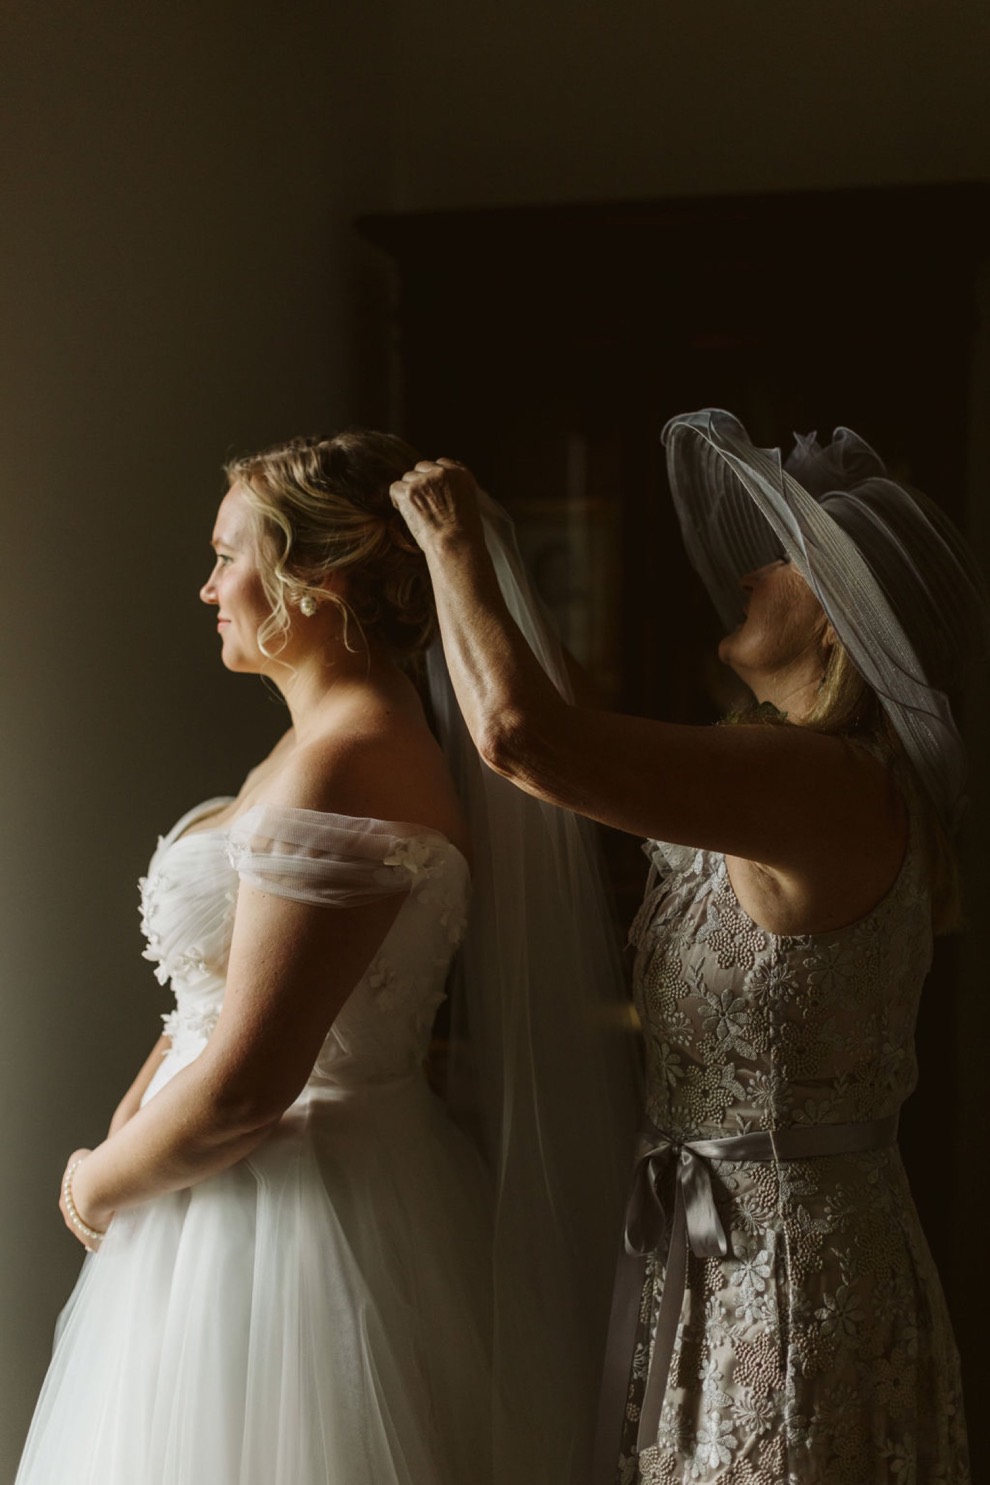 bride's mother tucking veil into her dauther's hair. Bride's mother wears a wide gray hat.